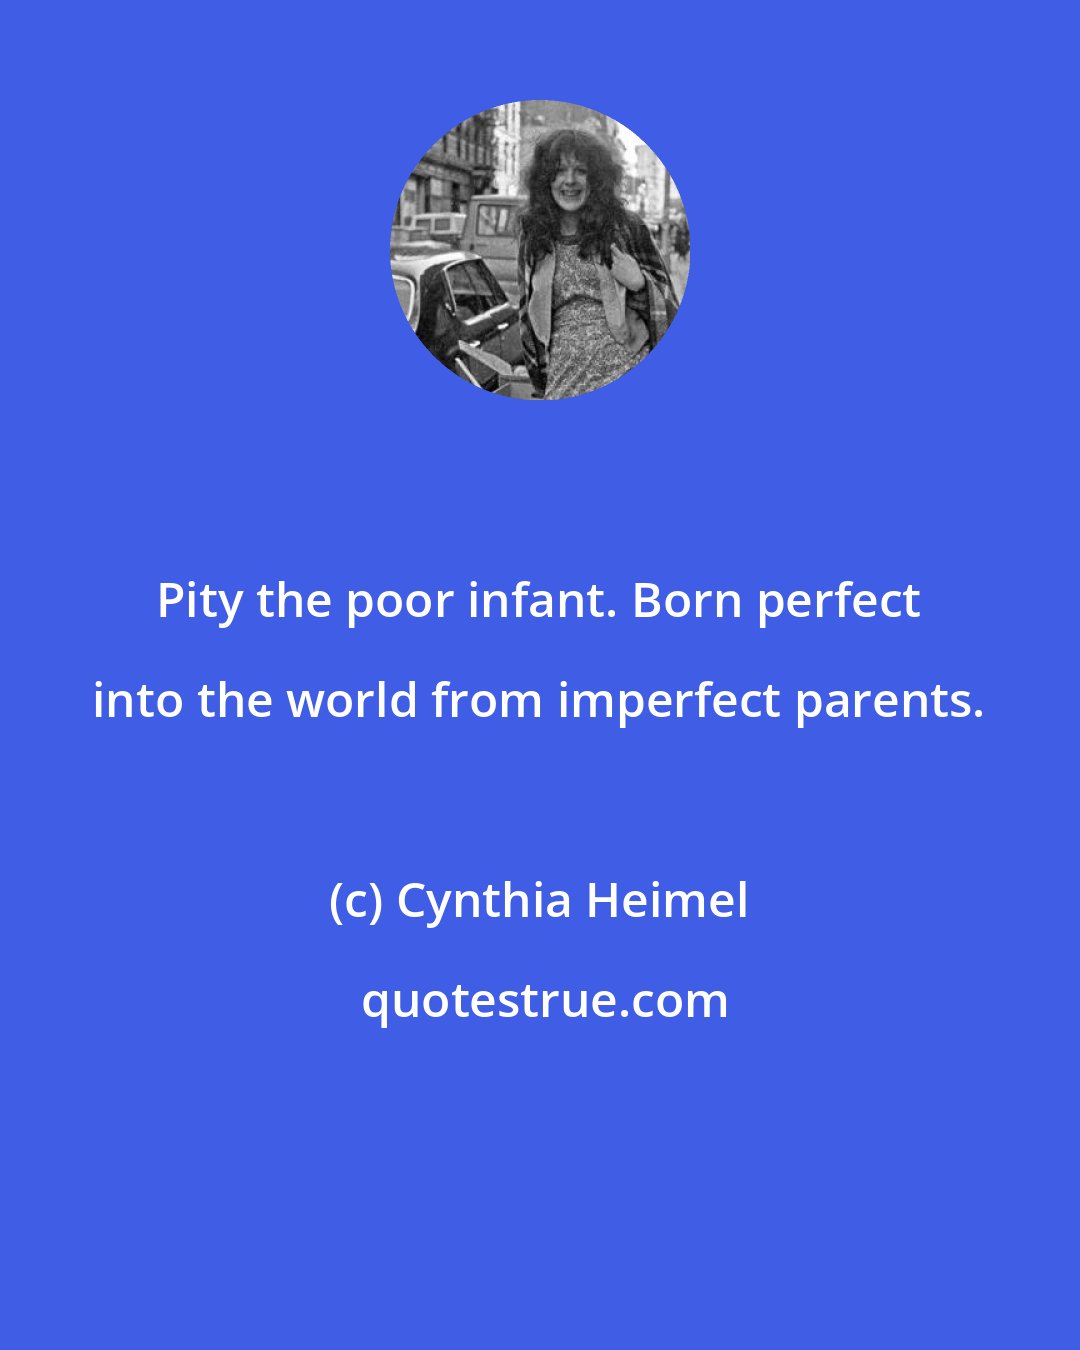 Cynthia Heimel: Pity the poor infant. Born perfect into the world from imperfect parents.